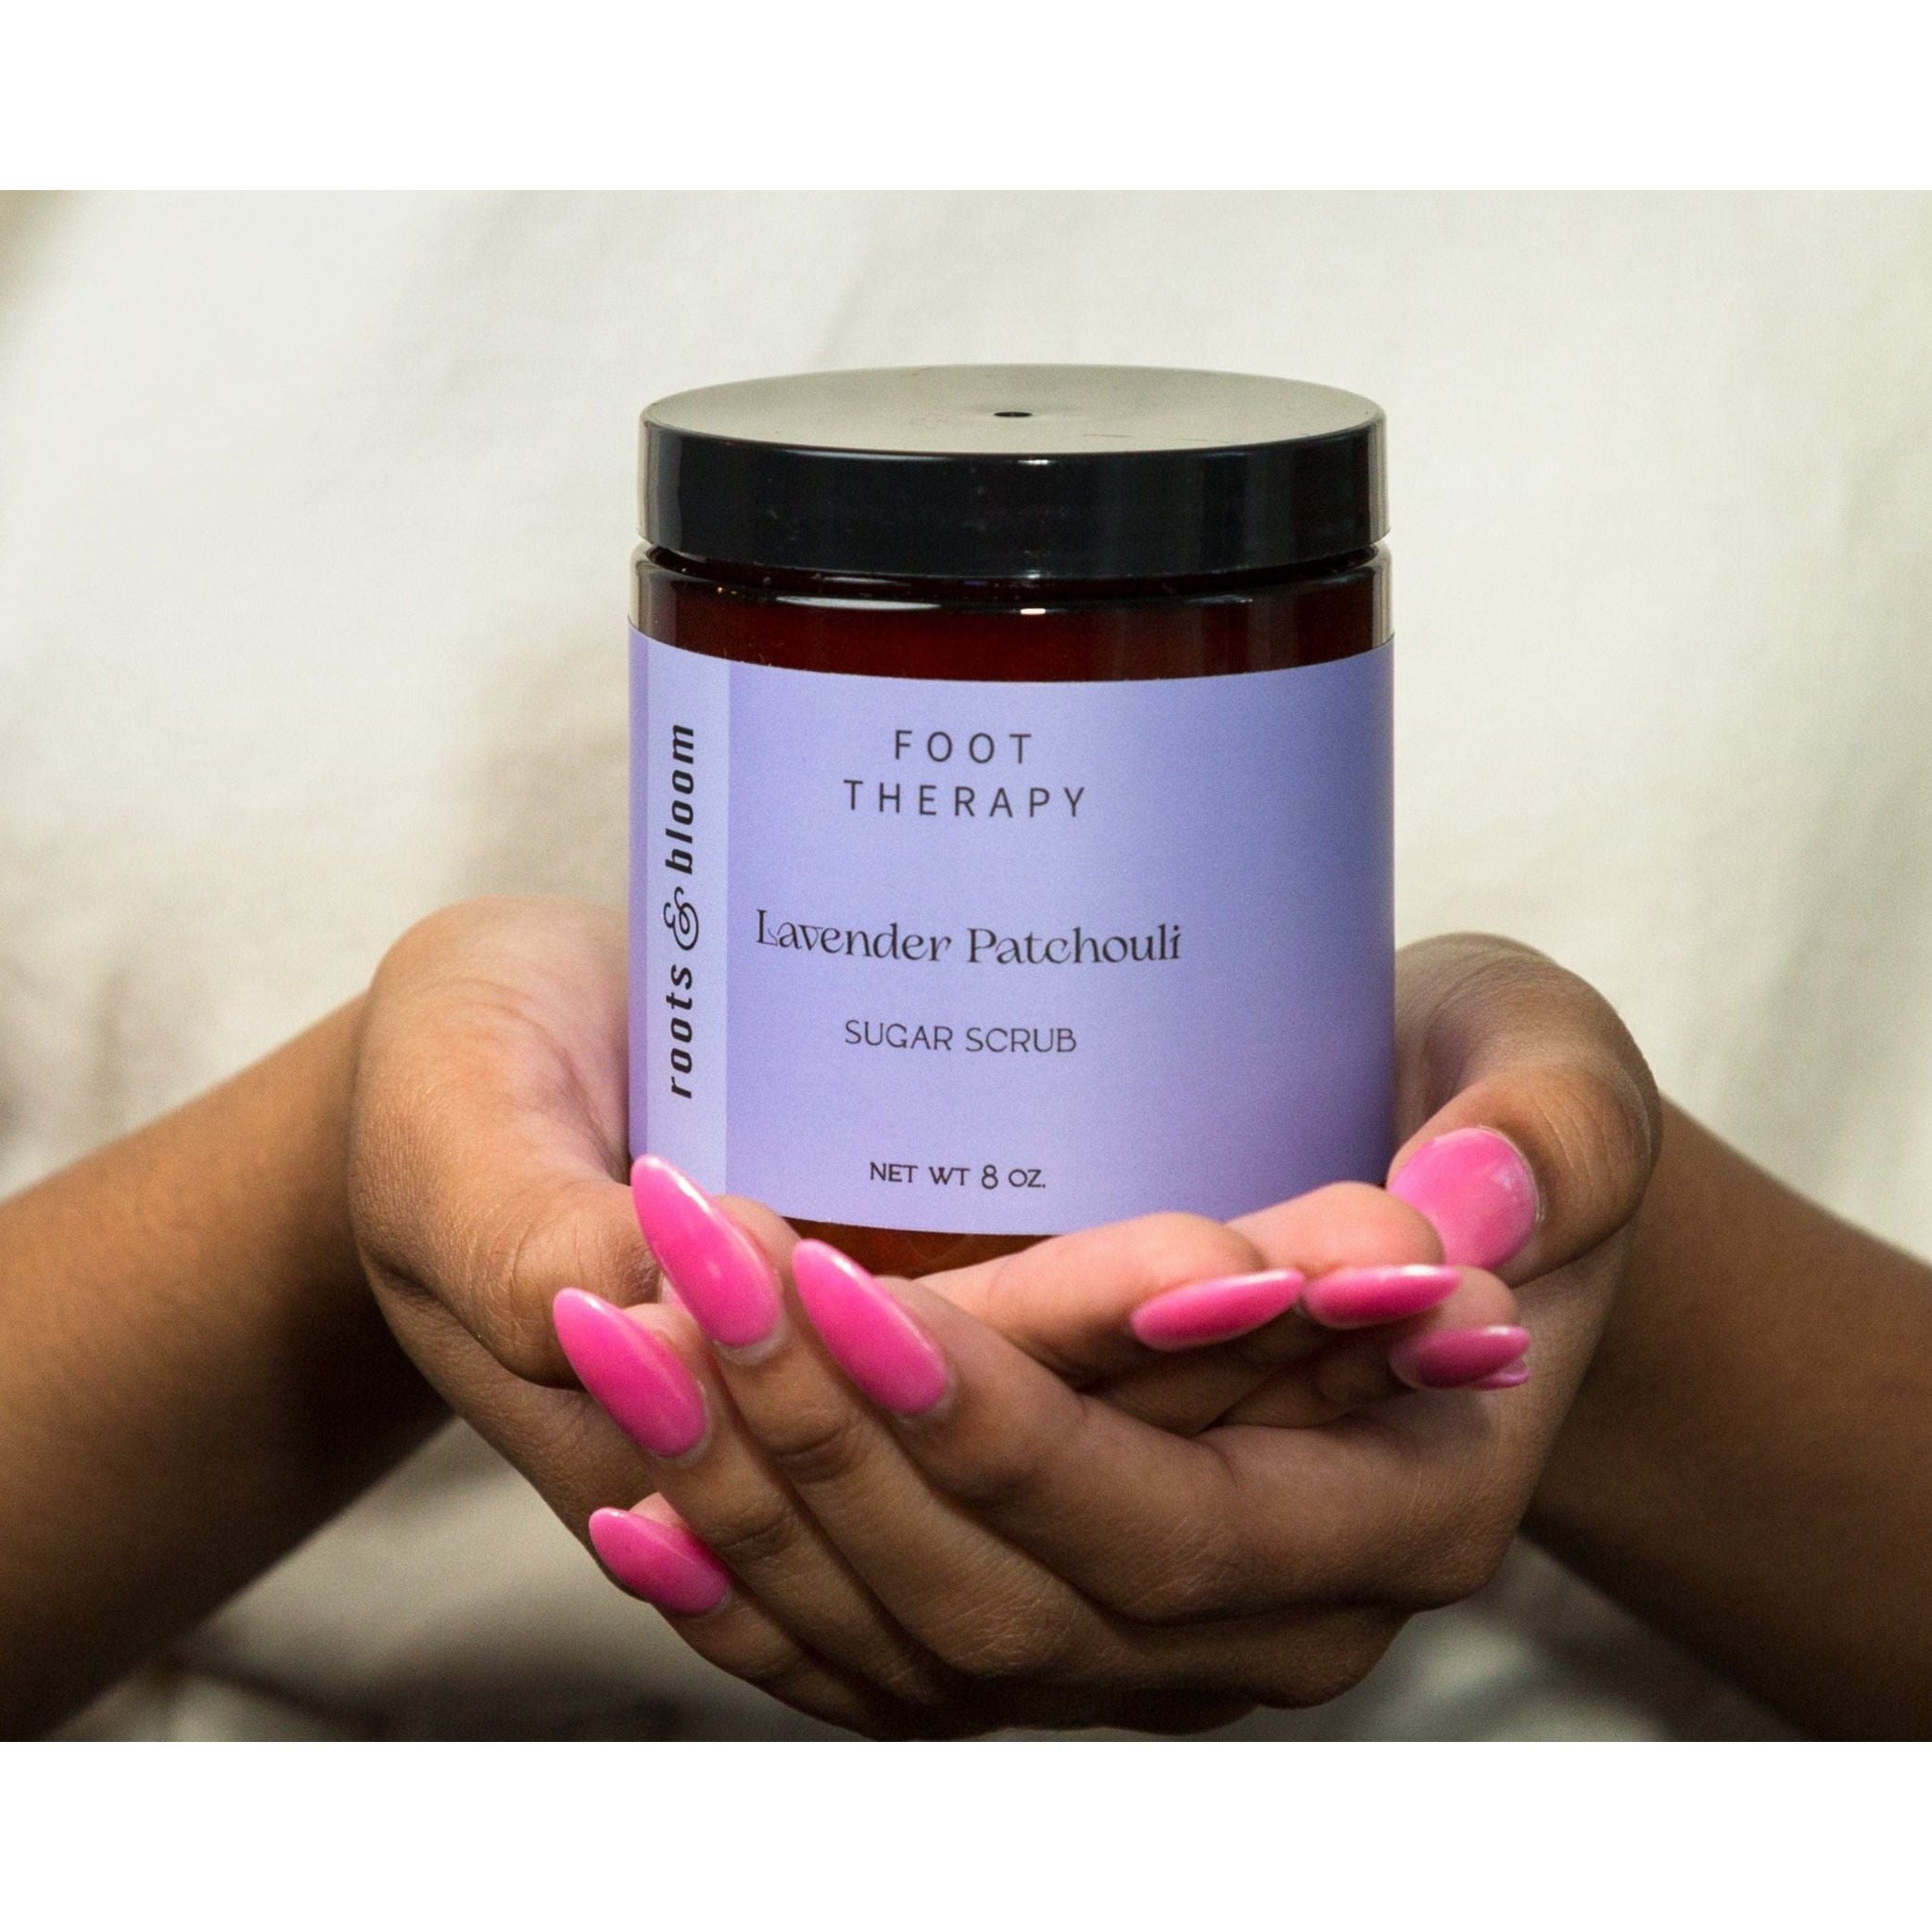 Exfoliating Sugar Scrub Held in Hands- Lavender Patchouli Scent by Roots and Bloom Skin Care